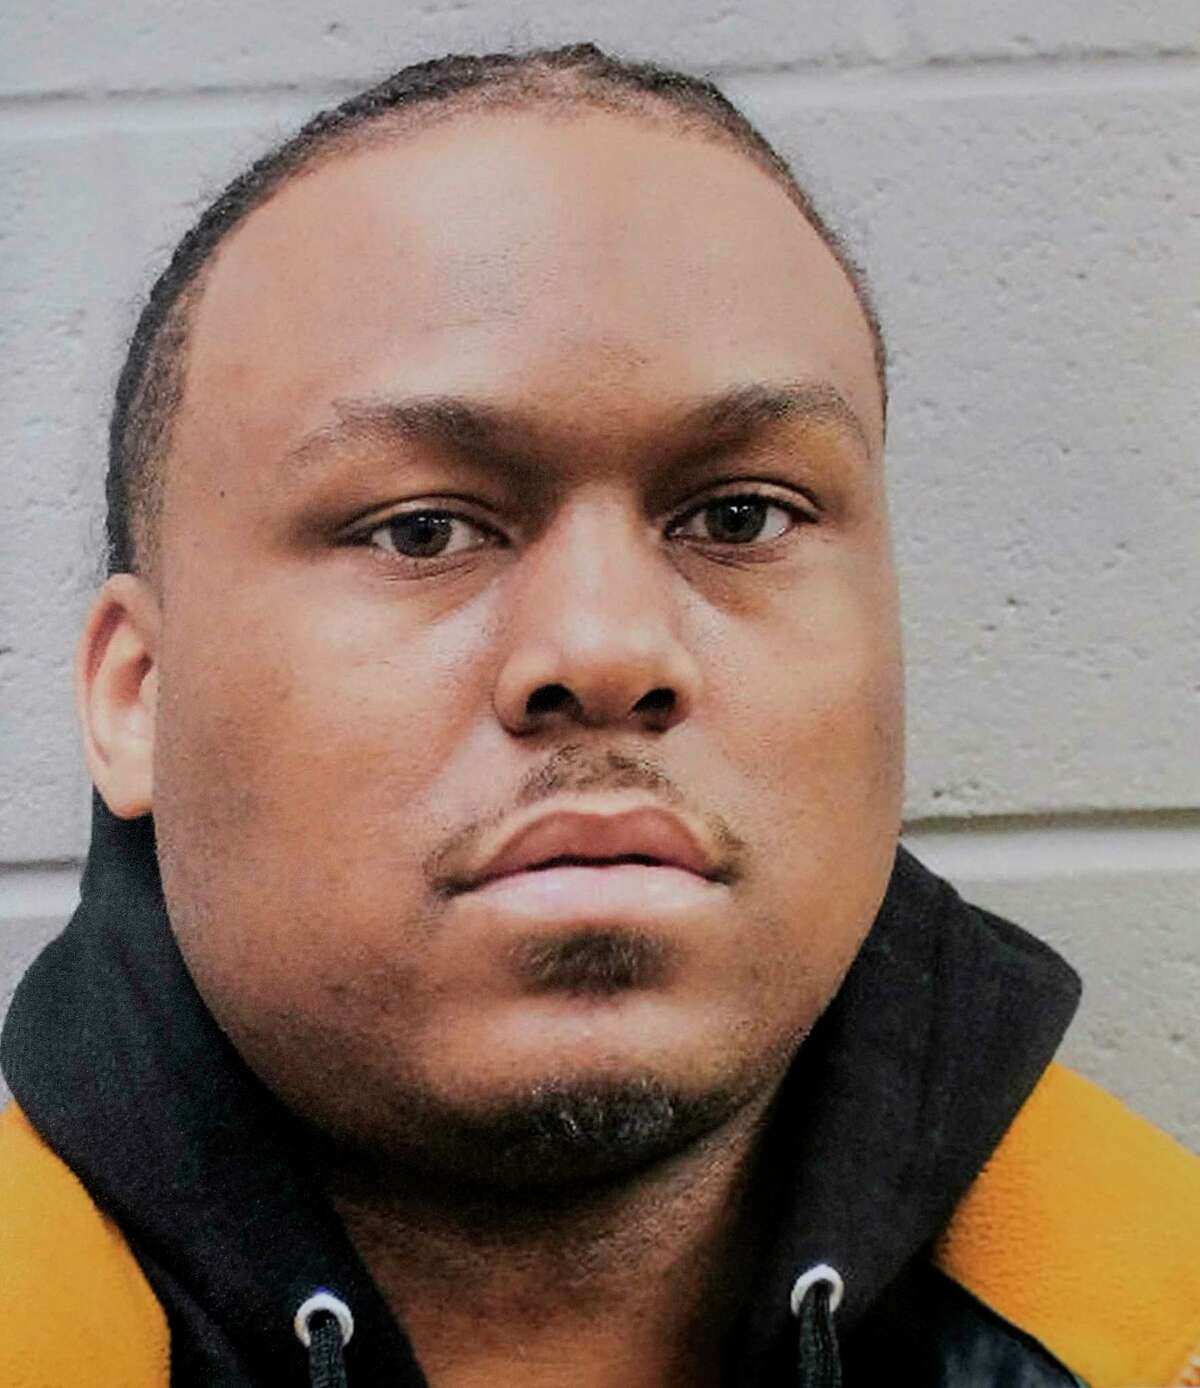 A booking mug shot of Patrick Xavier Clark, 33, is shown during a news conference announcing his arrest in connection with the fatal shooting Kirsnick Khari Ball, who is also known as Migos rapper Takeoff, on Friday, Dec. 2, 2022 in Houston. Clark has been charged with murder in the case.